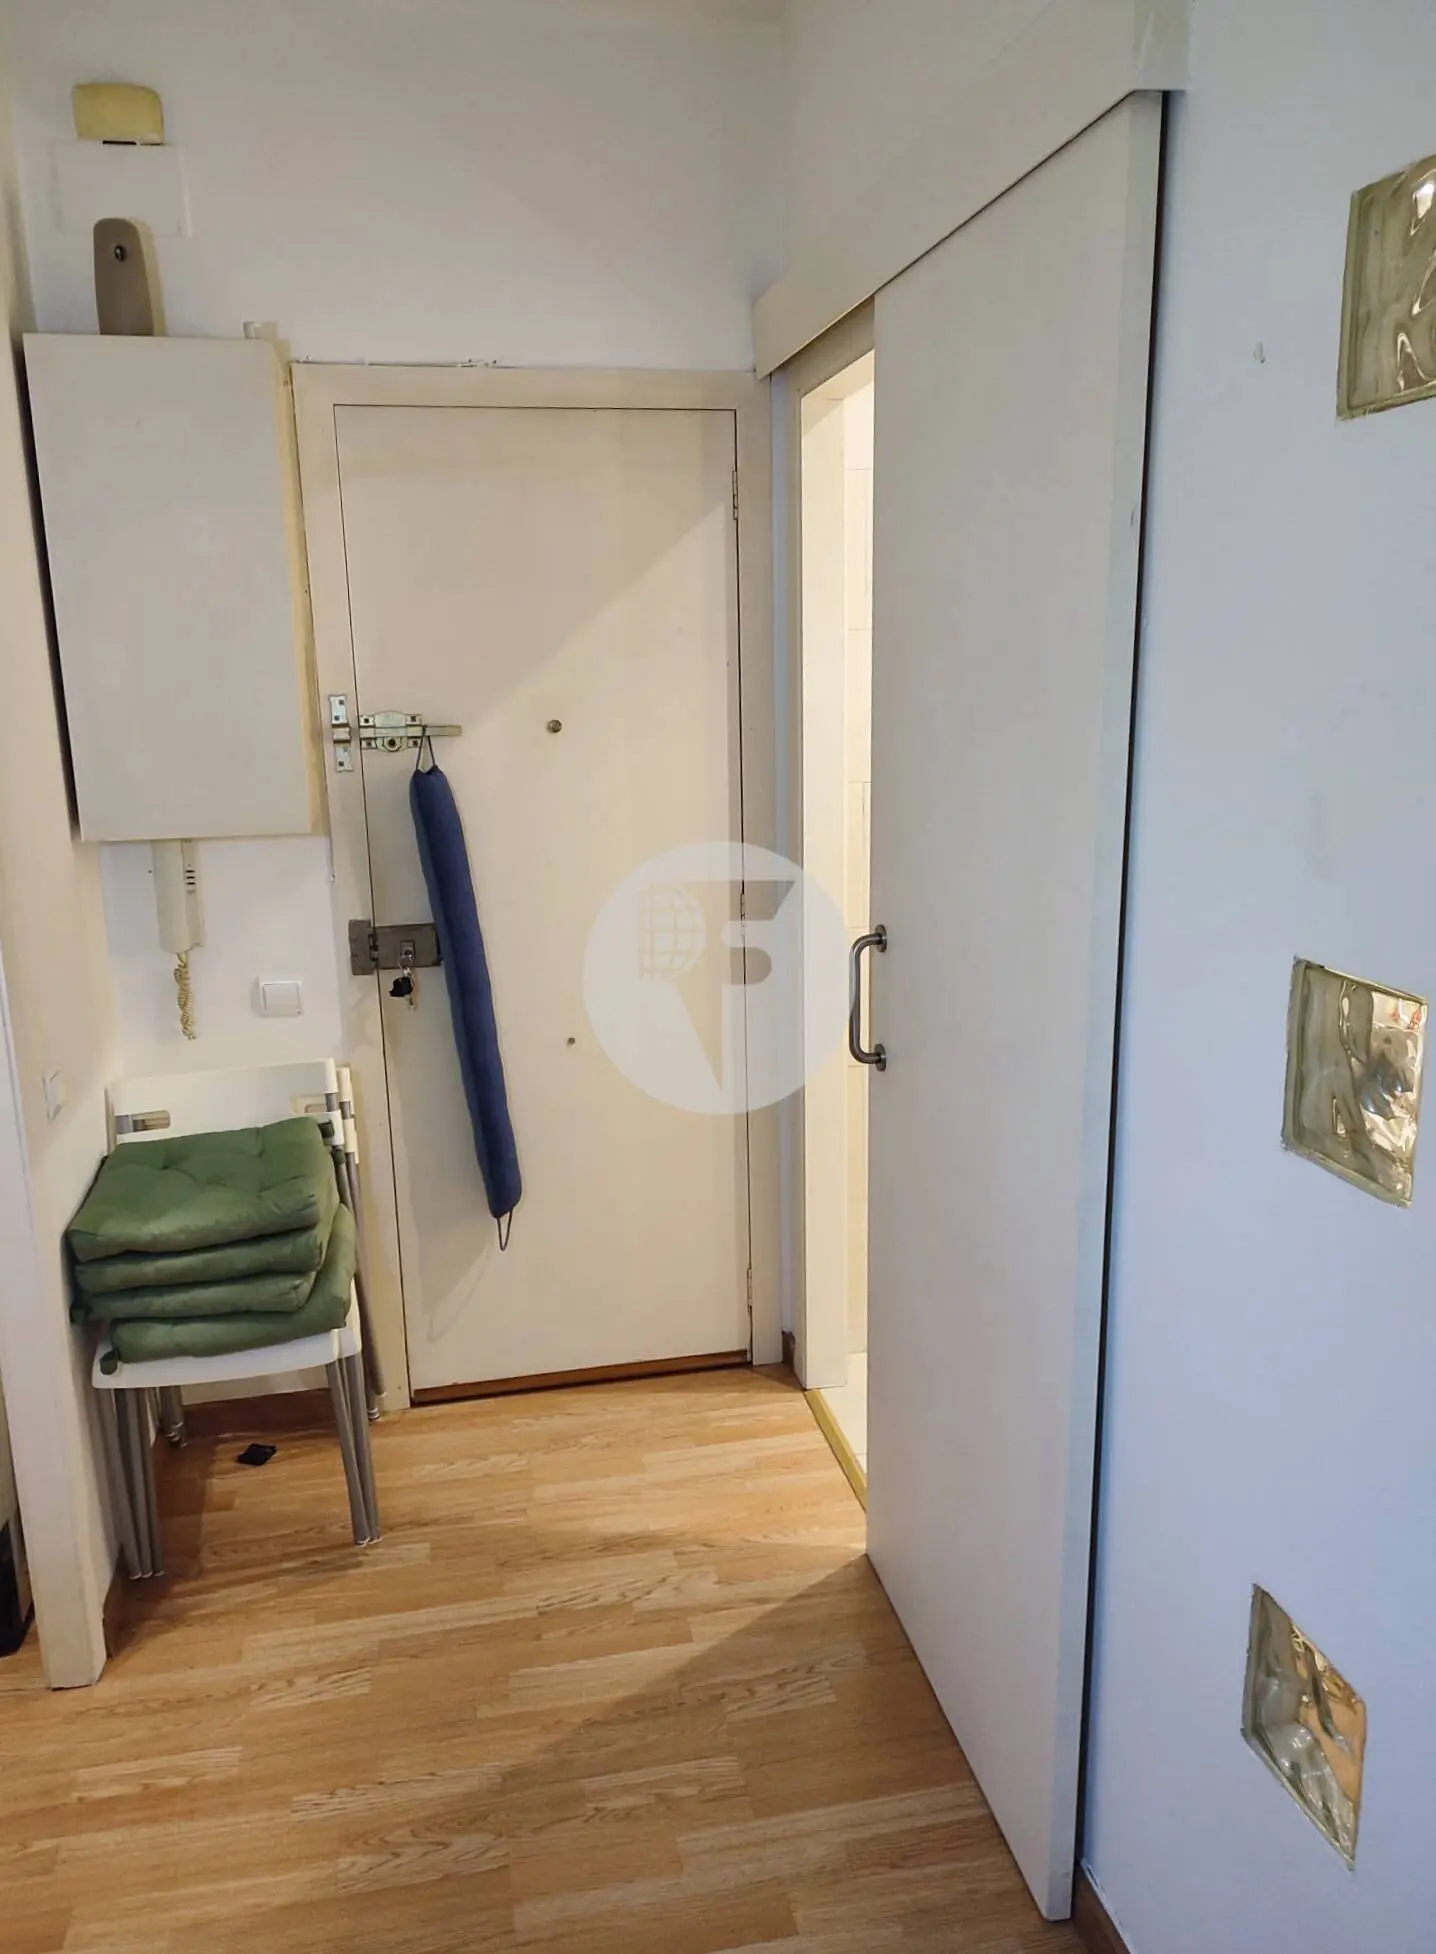 Magnificent apartment located in the Poble Sec neighborhood. 23